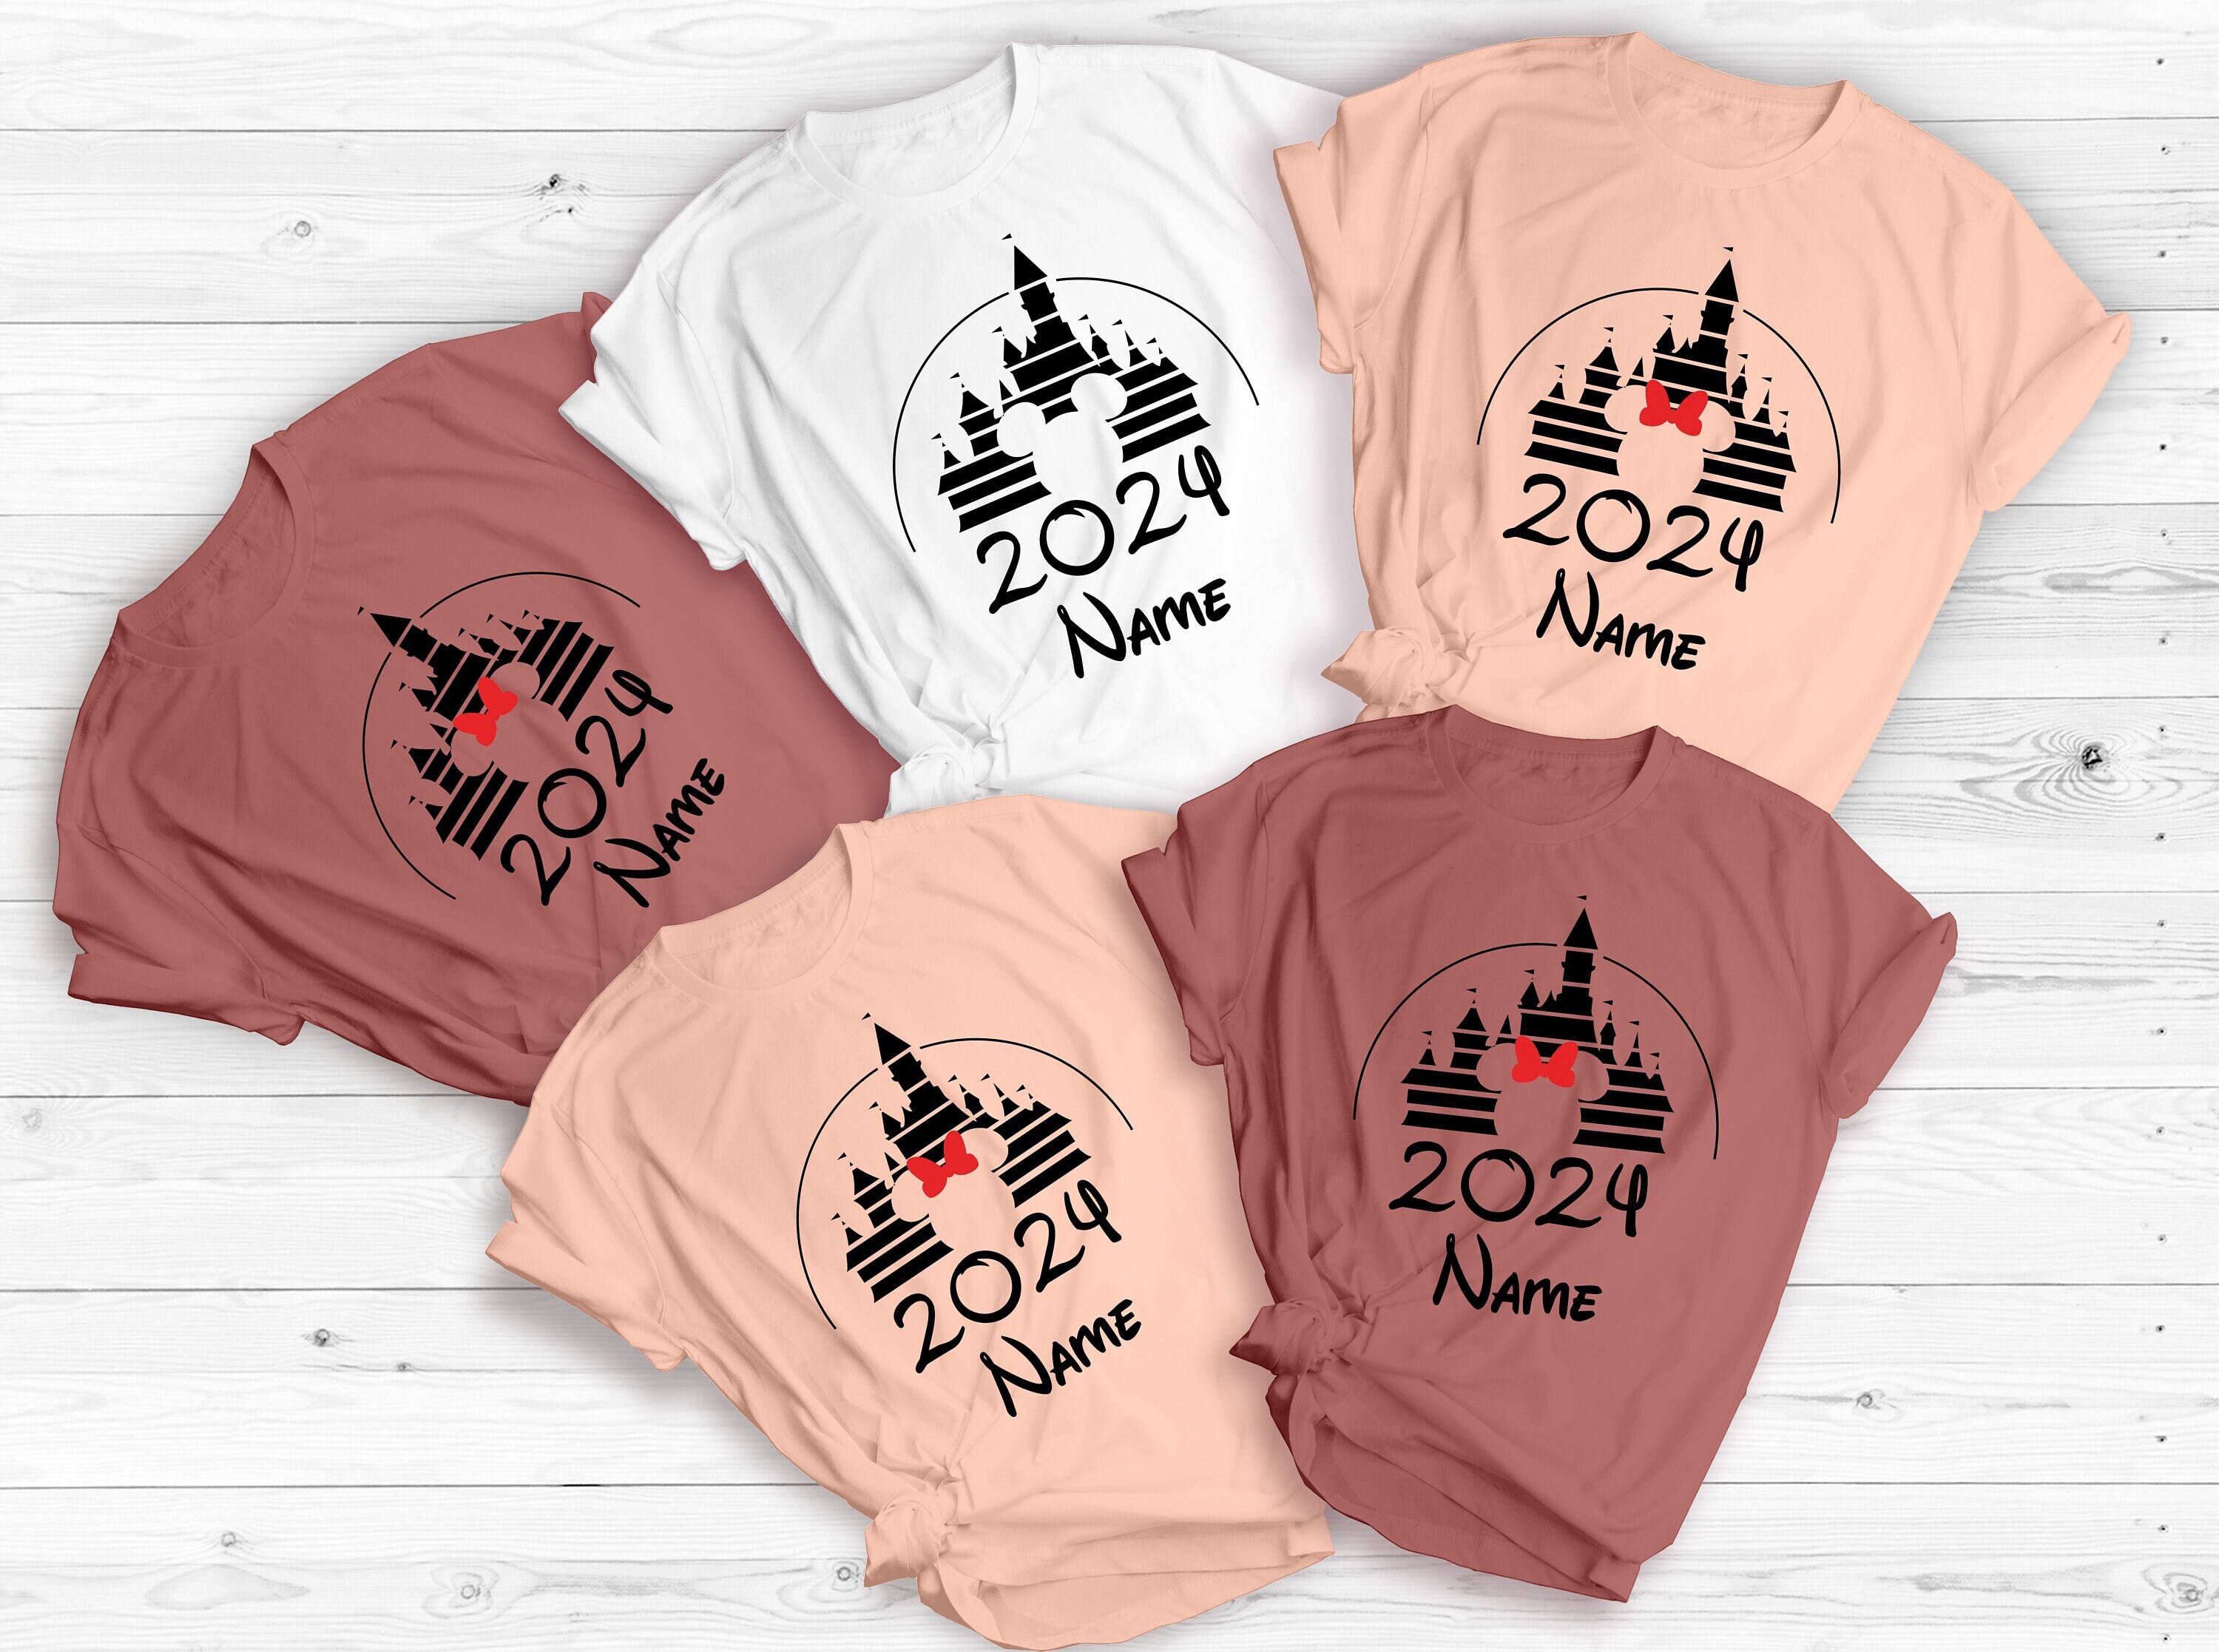 Discover Custom Disney Family Vacation 2024, Personalized Family Trip T-Shirt